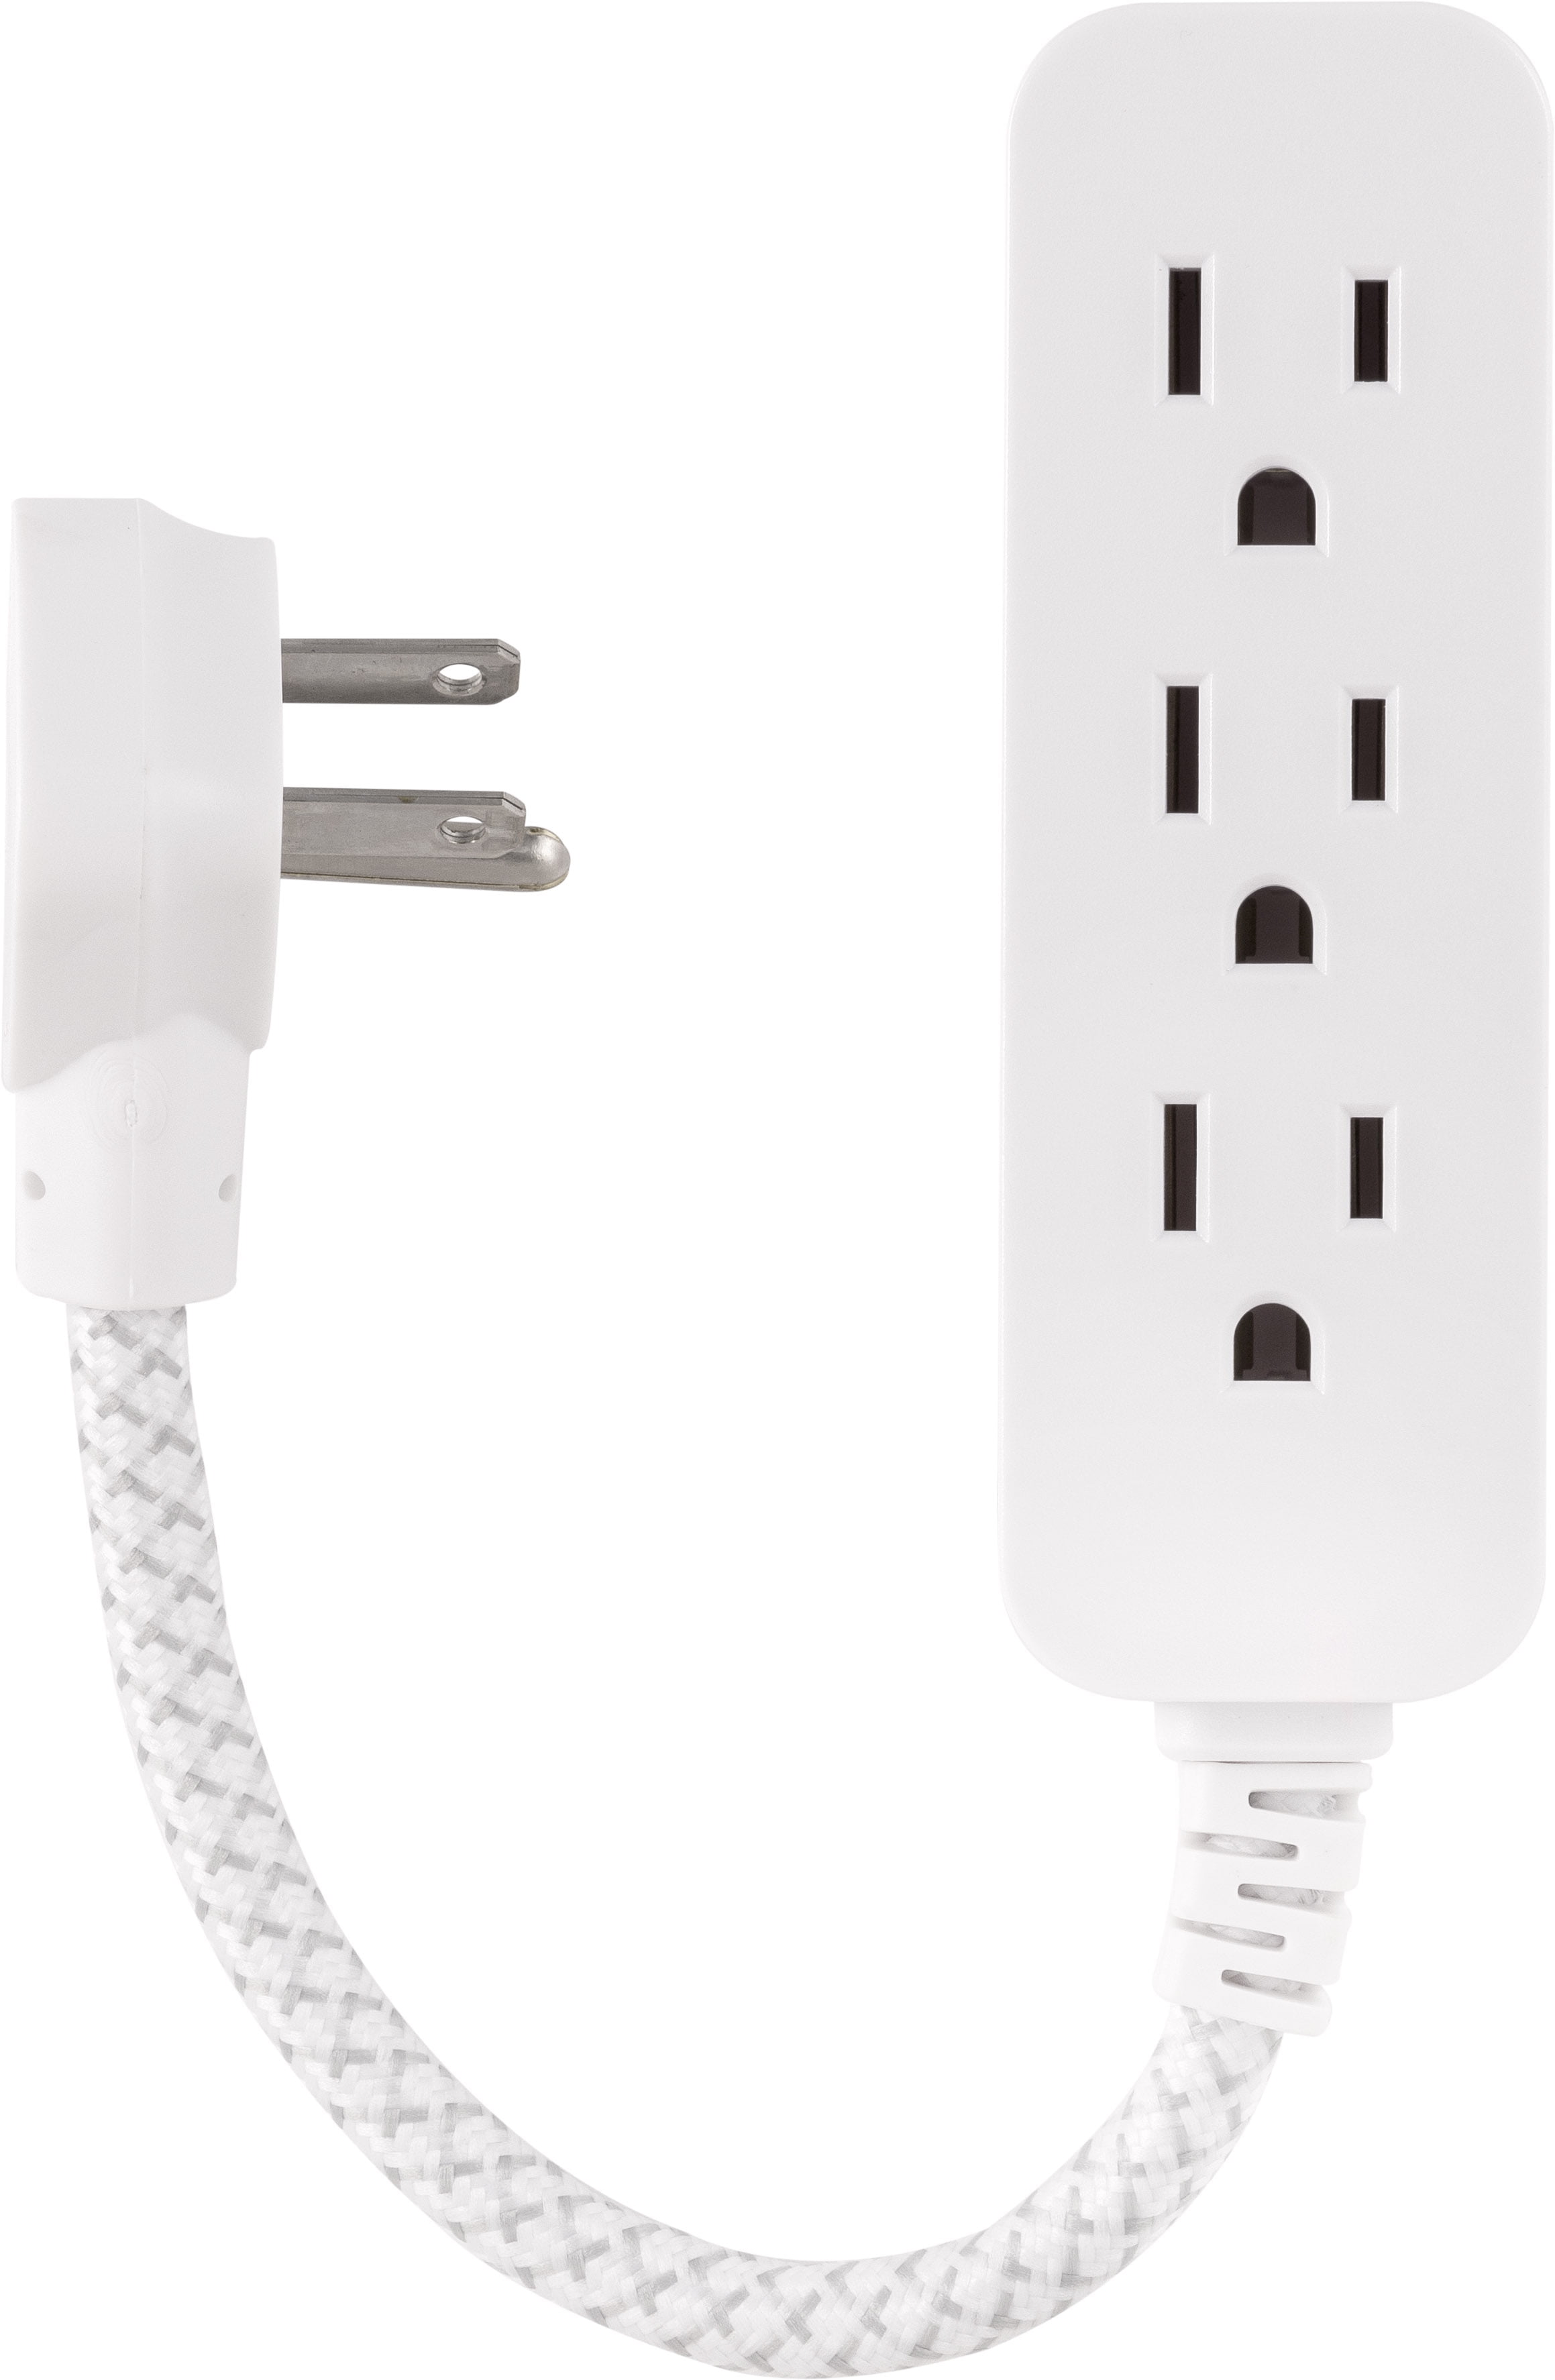 2 Pack No Surge Protector Fosmon 3 Outlet Power Strip Ship Approved 3 Prong Grounded Plug UL Listed 3ft Outlet Extender for Cruise Ship Travel Home 3-Foot Short Extension Cord Wall Mount